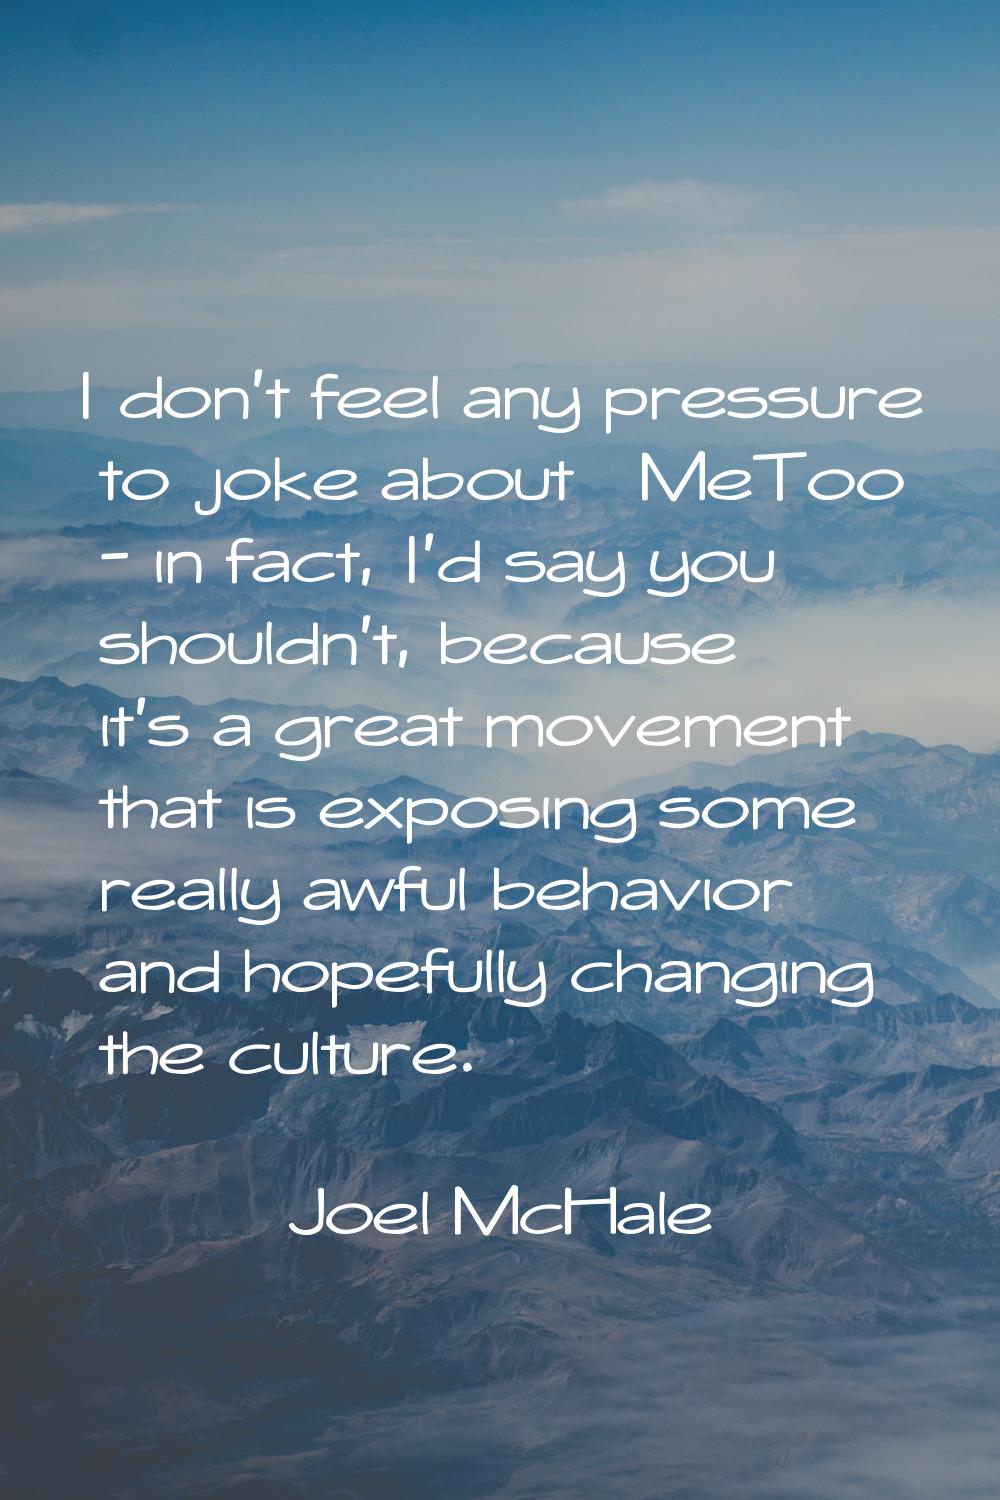 I don't feel any pressure to joke about #MeToo - in fact, I'd say you shouldn't, because it's a gre